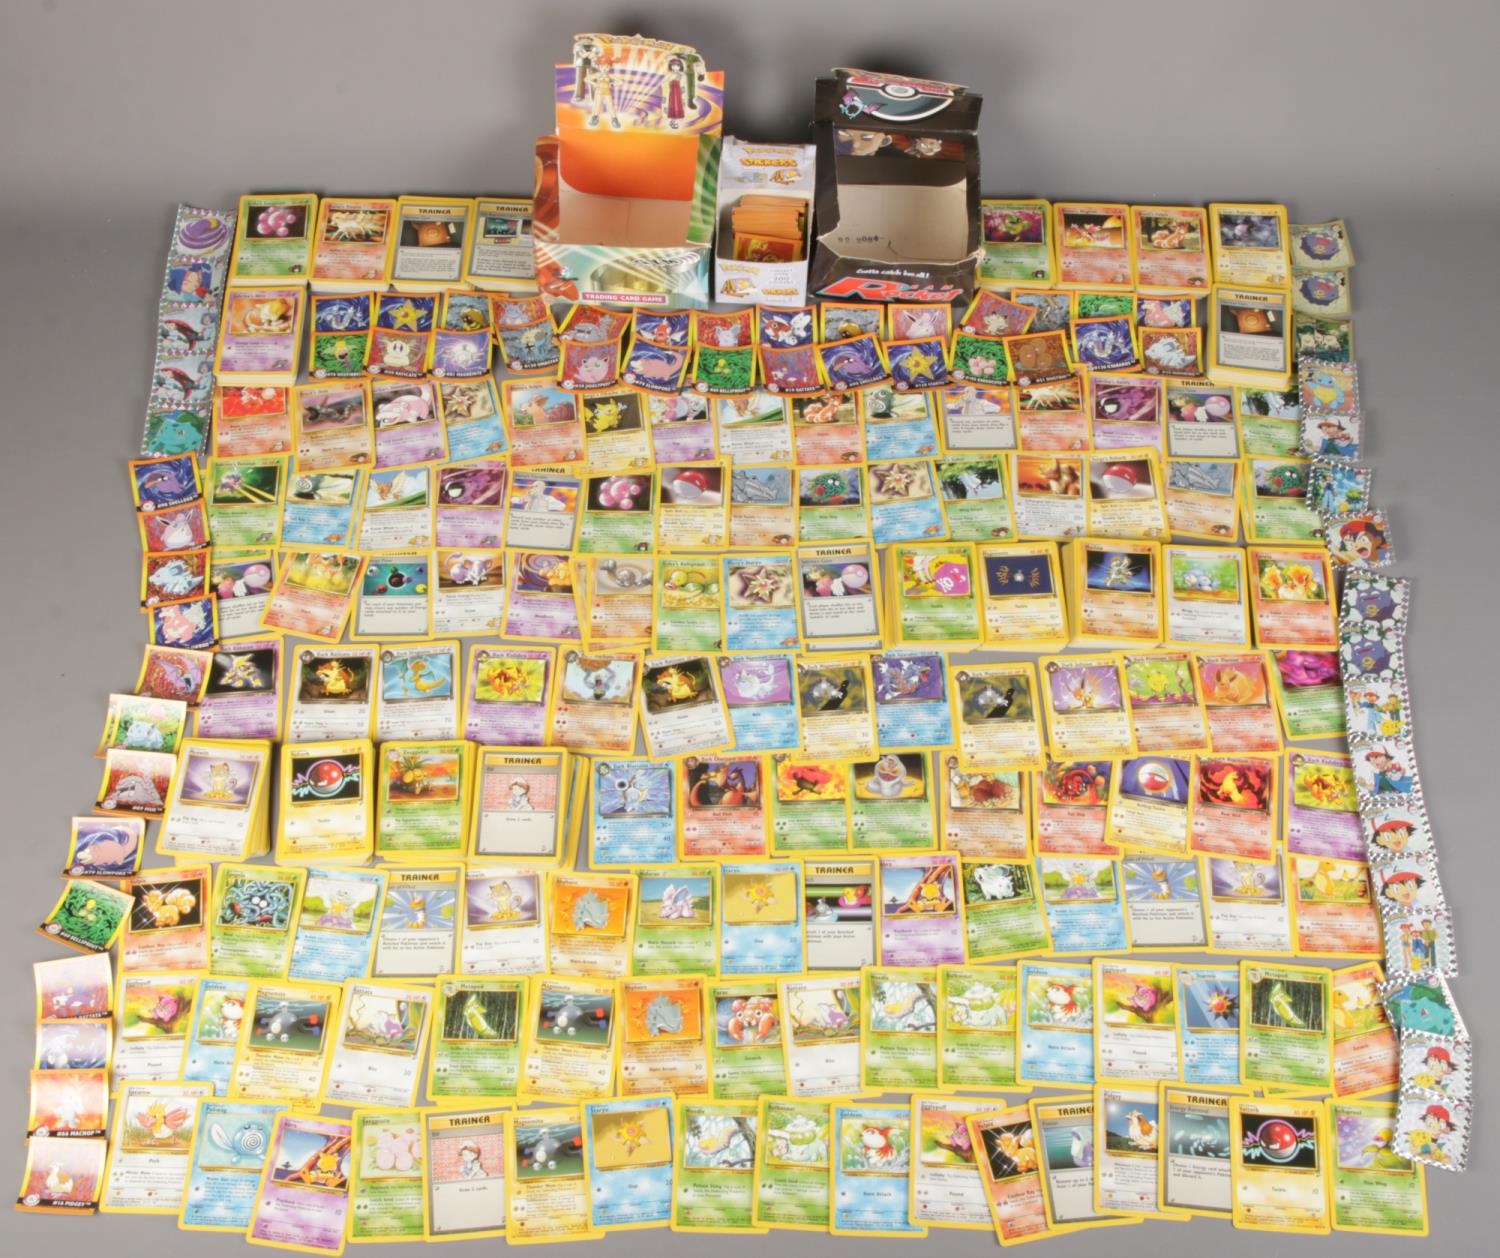 A large quantity of loose PokÃ©mon cards and stickers along with original Team Rocket booster pack